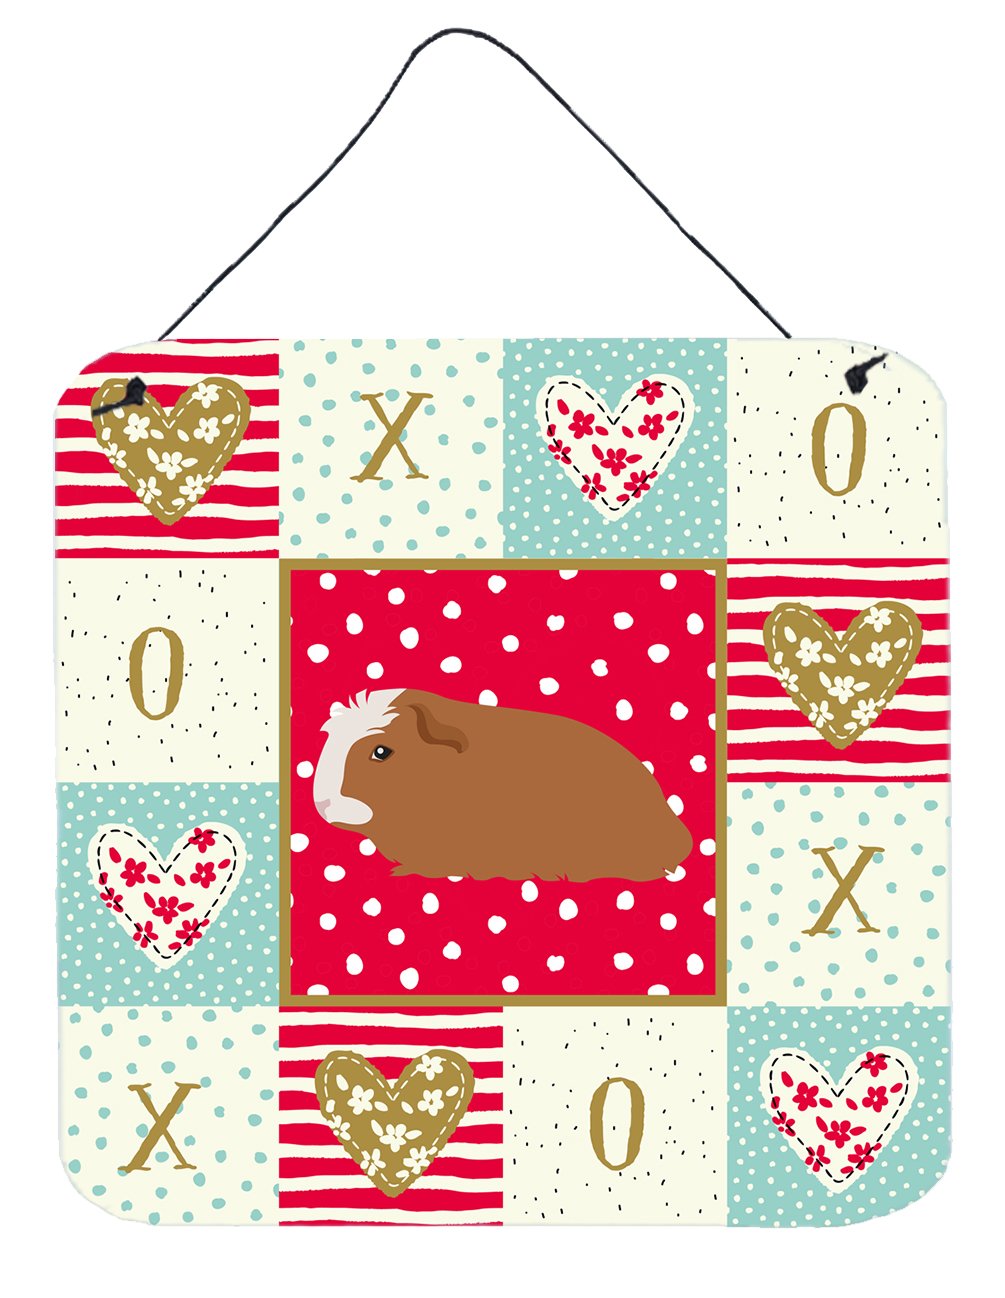 Crested Guinea Pig Love Wall or Door Hanging Prints CK5428DS66 by Caroline's Treasures